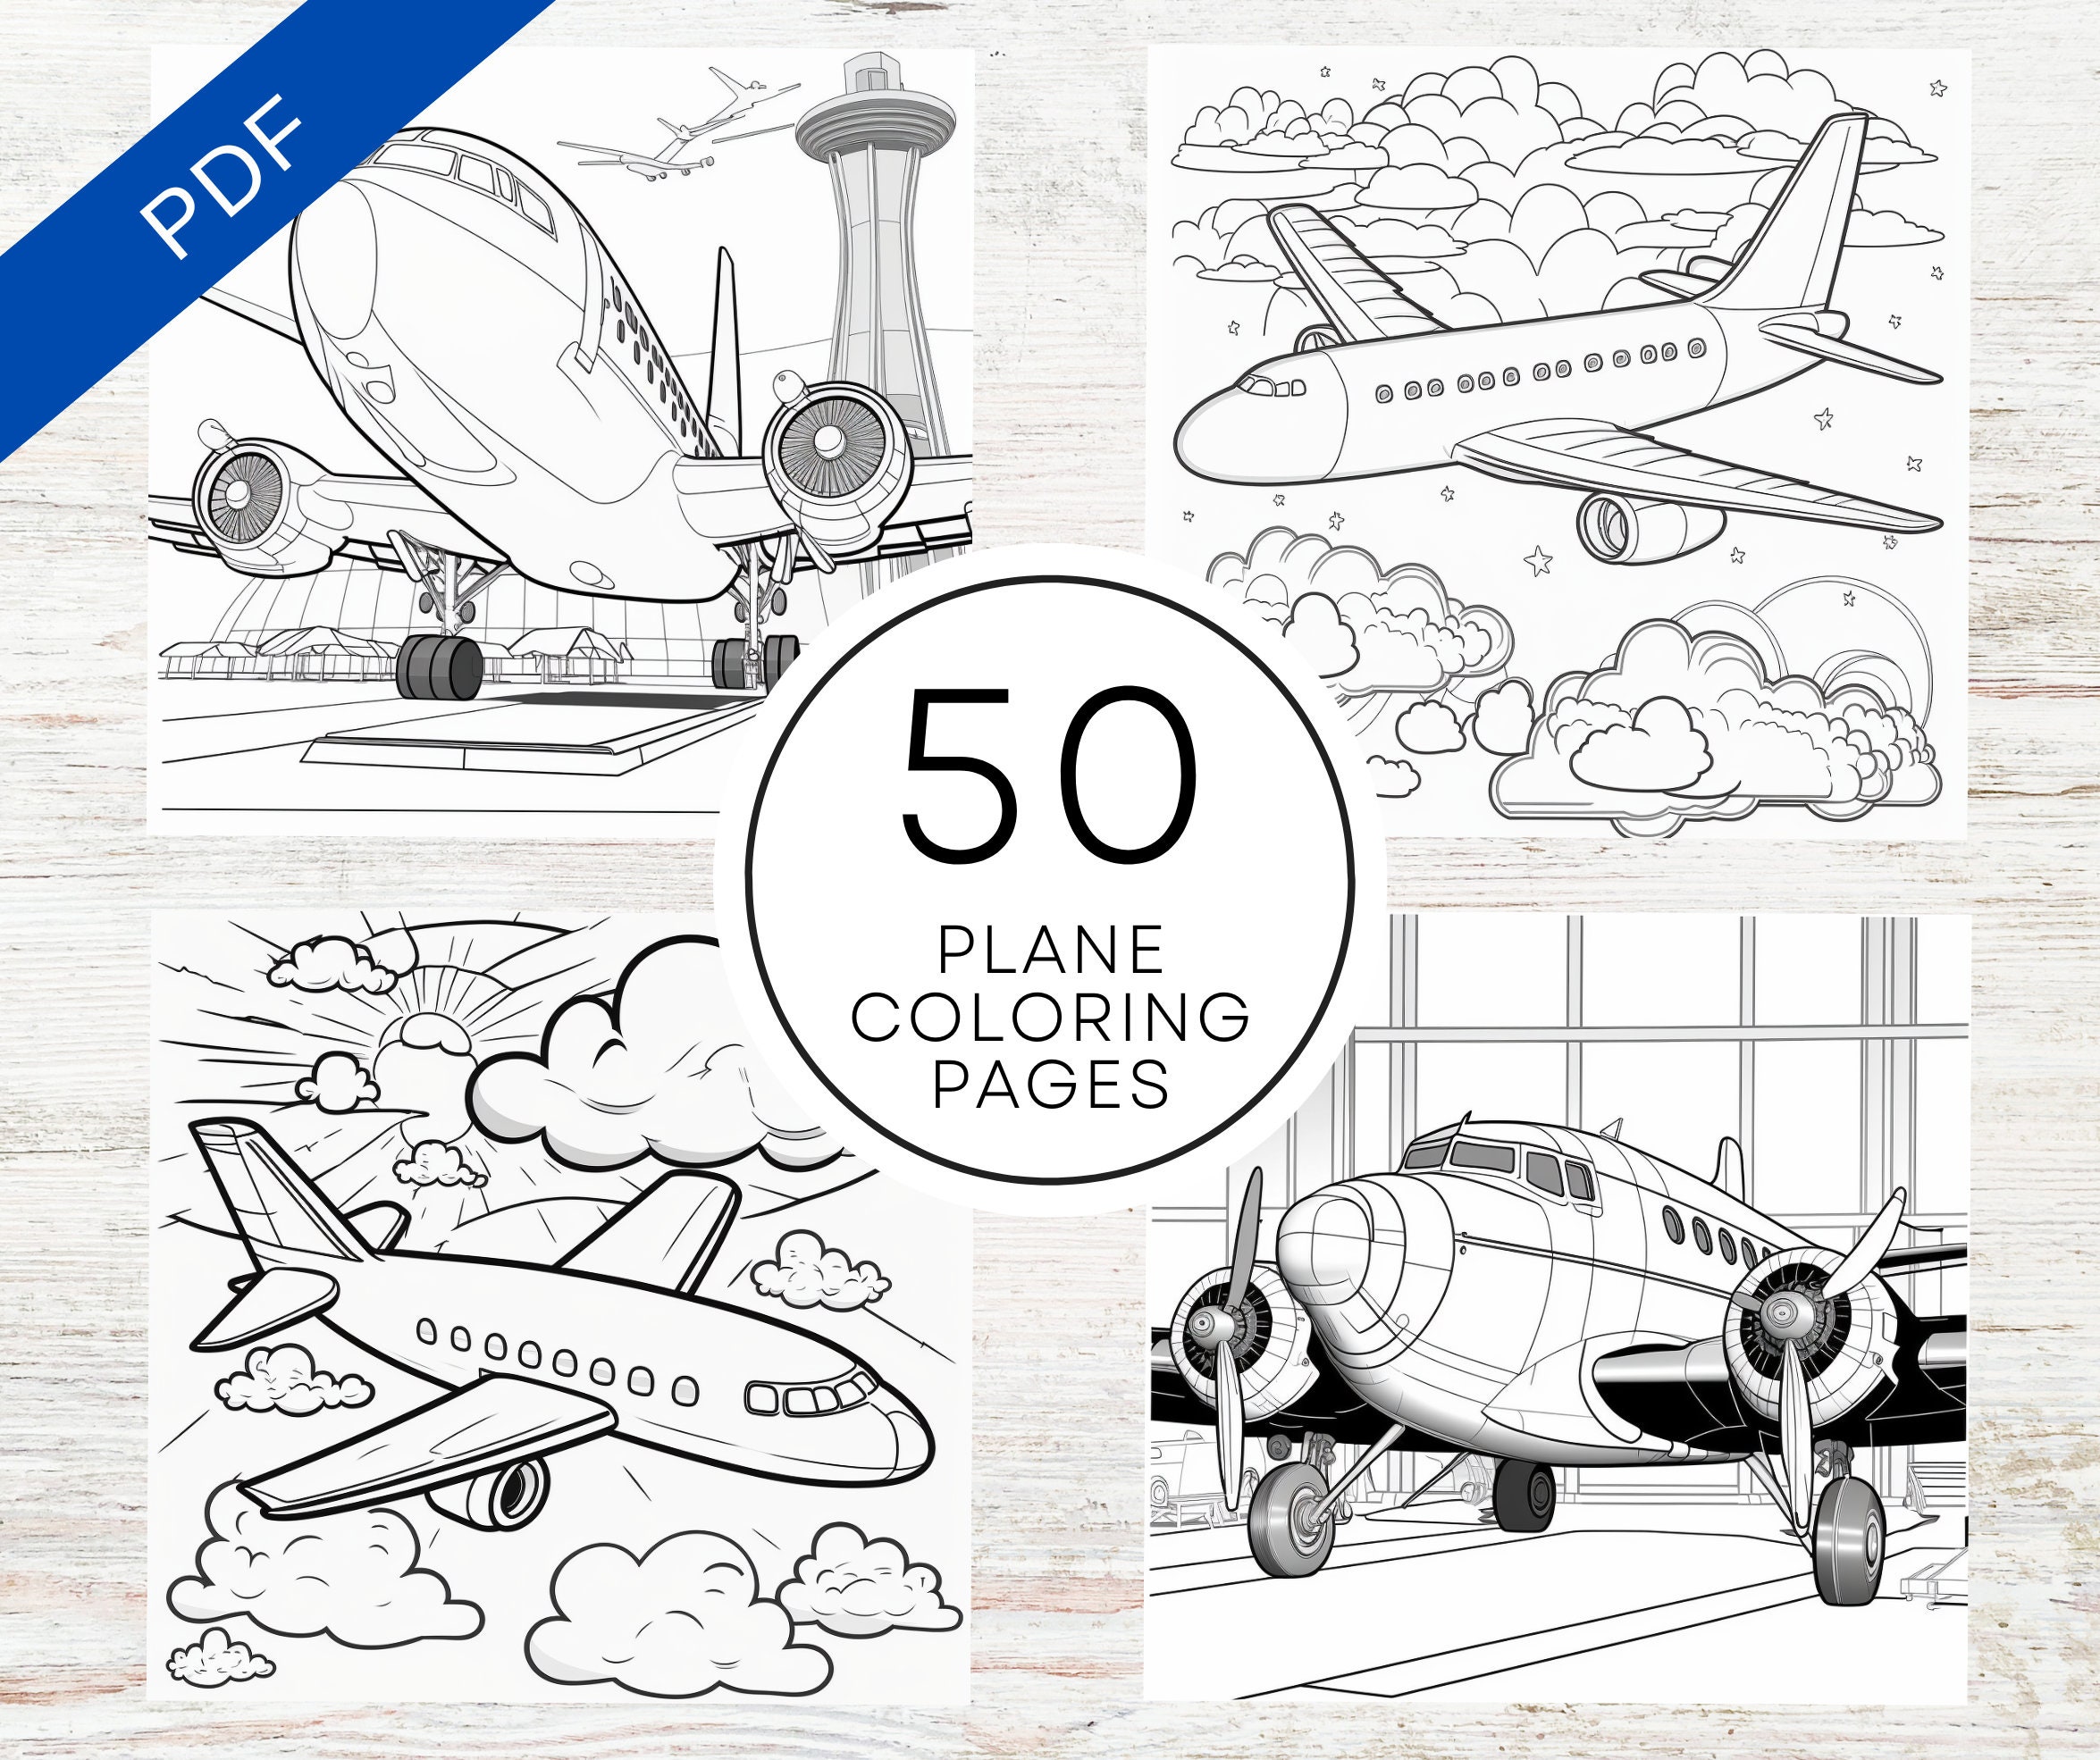 Airplane Coloring Book for Kids 4 -8: Plane Coloring and Activity Book for  Toddlers, Kids and Baby Who Love to Draw Airplanes Gift for Preschoolers Ki  (Paperback)